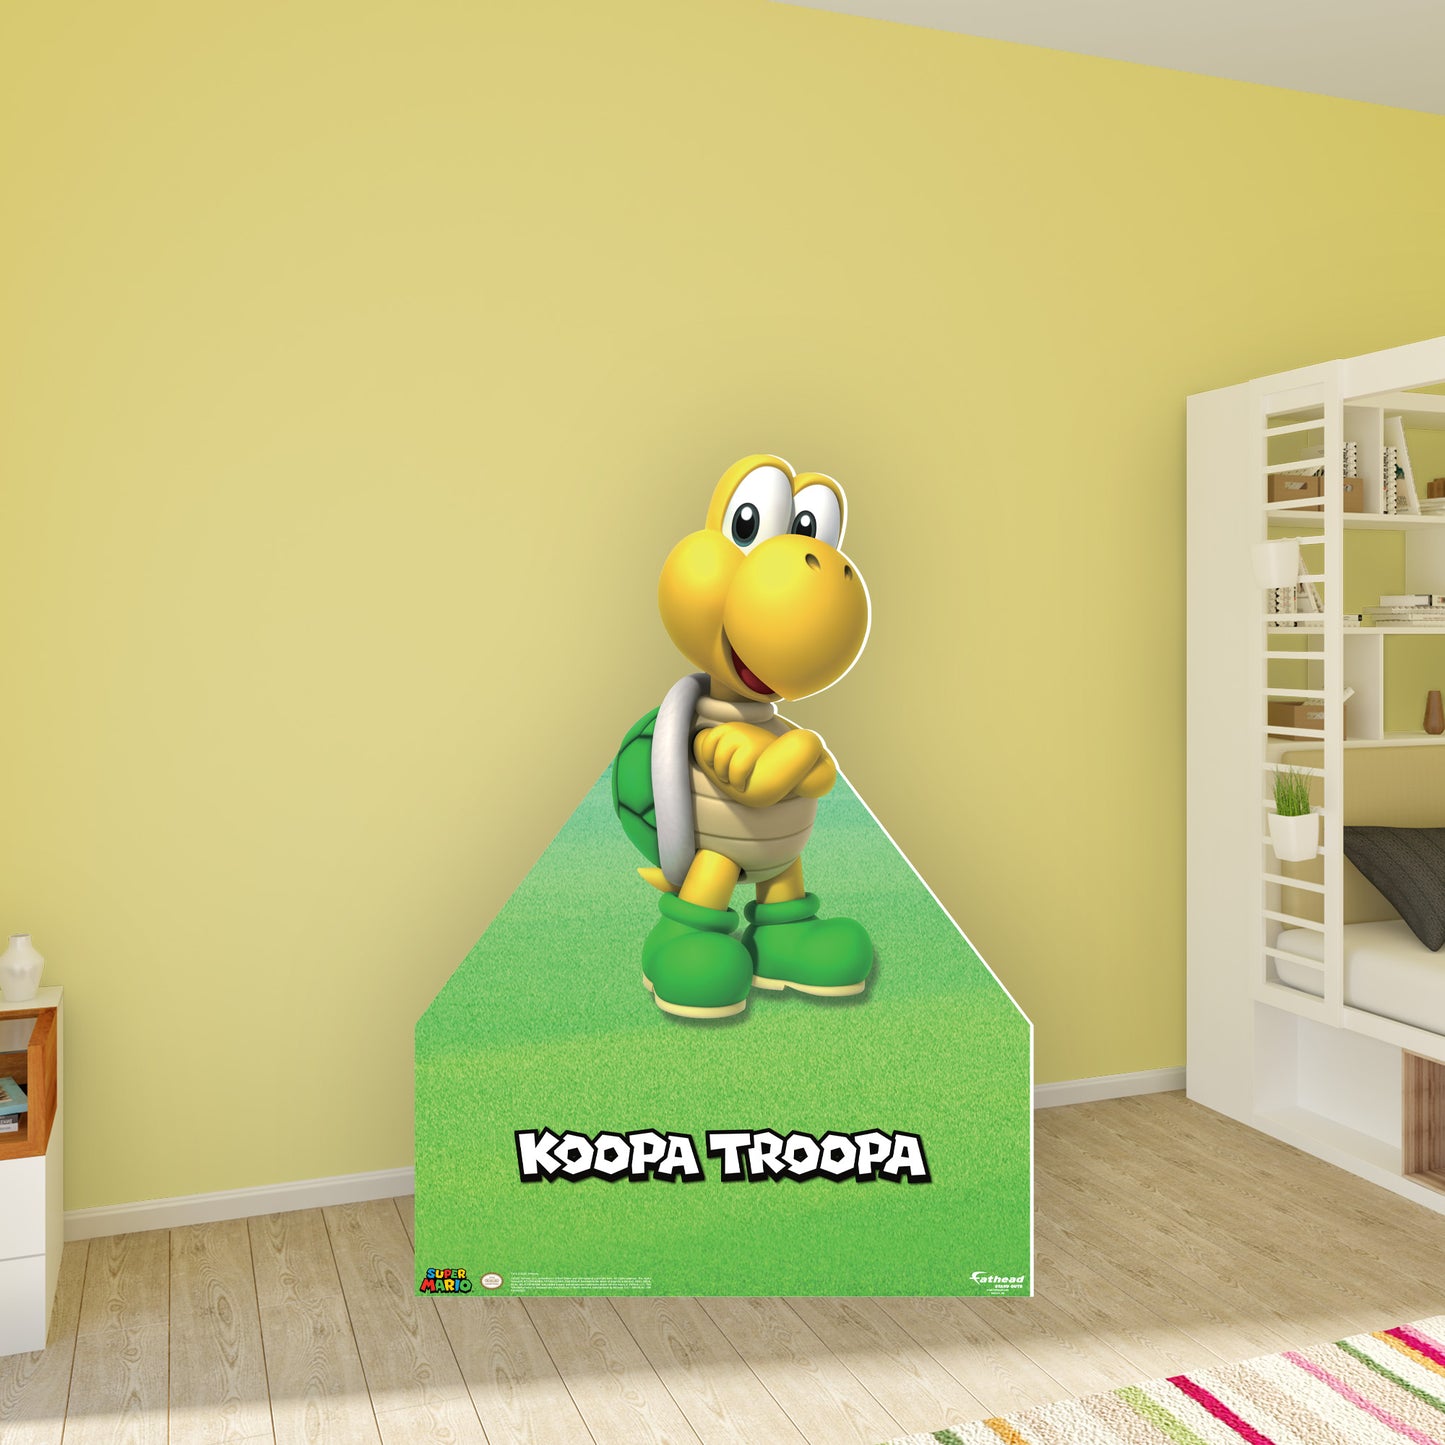 Super Mario: Koopa Troopa Life-Size Foam Core Cutout - Officially Licensed Nintendo Stand Out